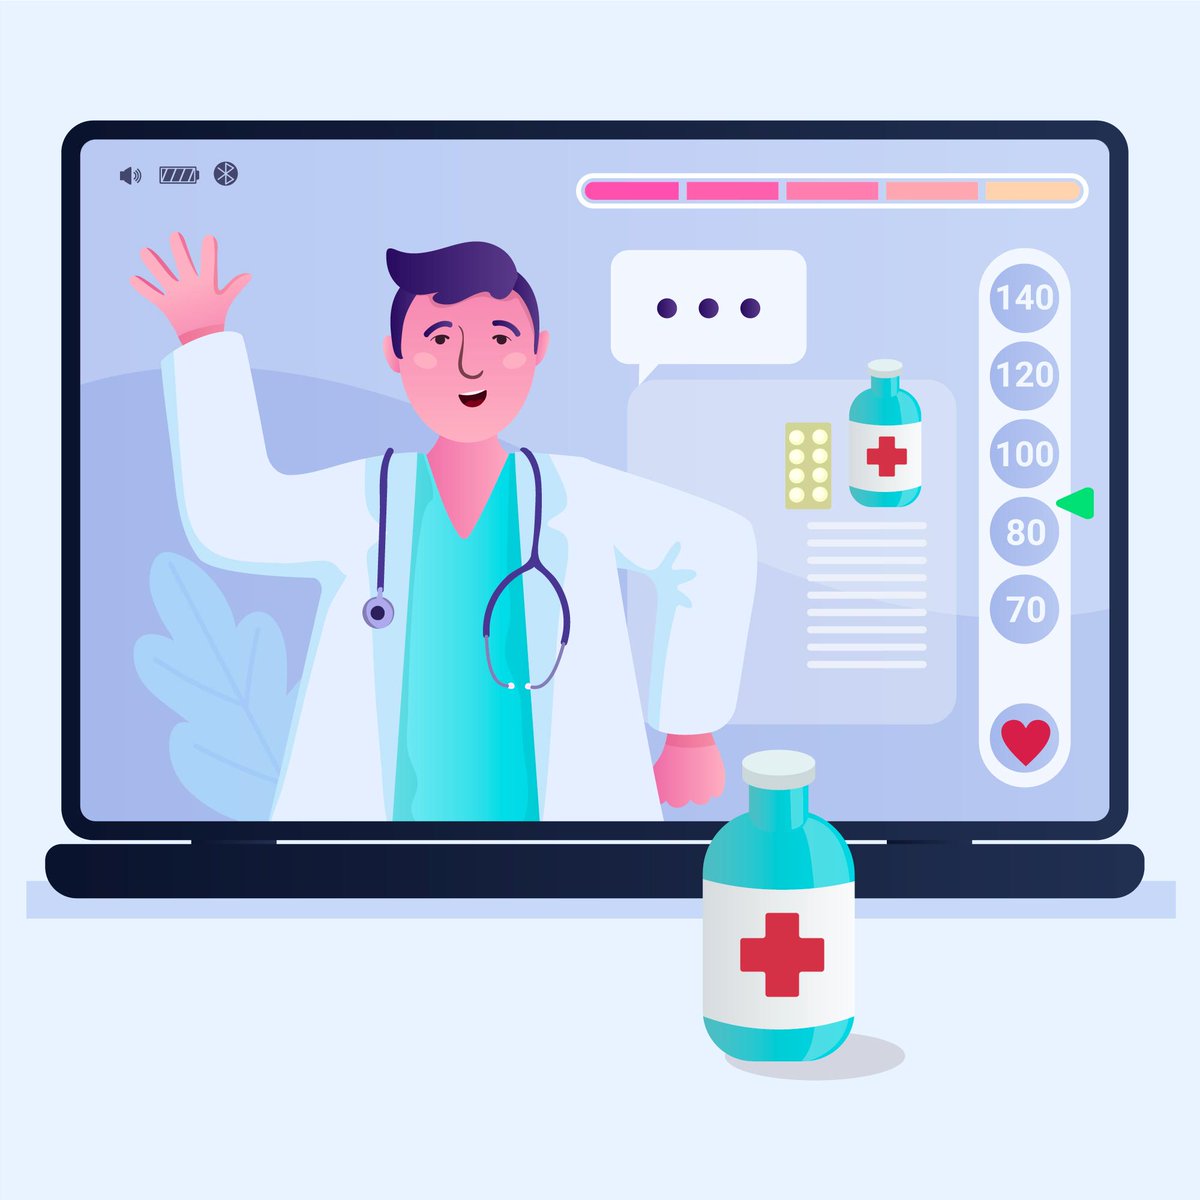 Custom Telehealth Solutions

Personalized healthcare solutions.

ittechnologysolutiones.weebly.com/blog/achieve-h…

#SISGAIN #TelehealthSolutions #CustomHealthcare #BespokeTelemedicine #TailoredHealthTech #PersonalizedTelehealth, #TelehealthInnovation #CustomHealthcare